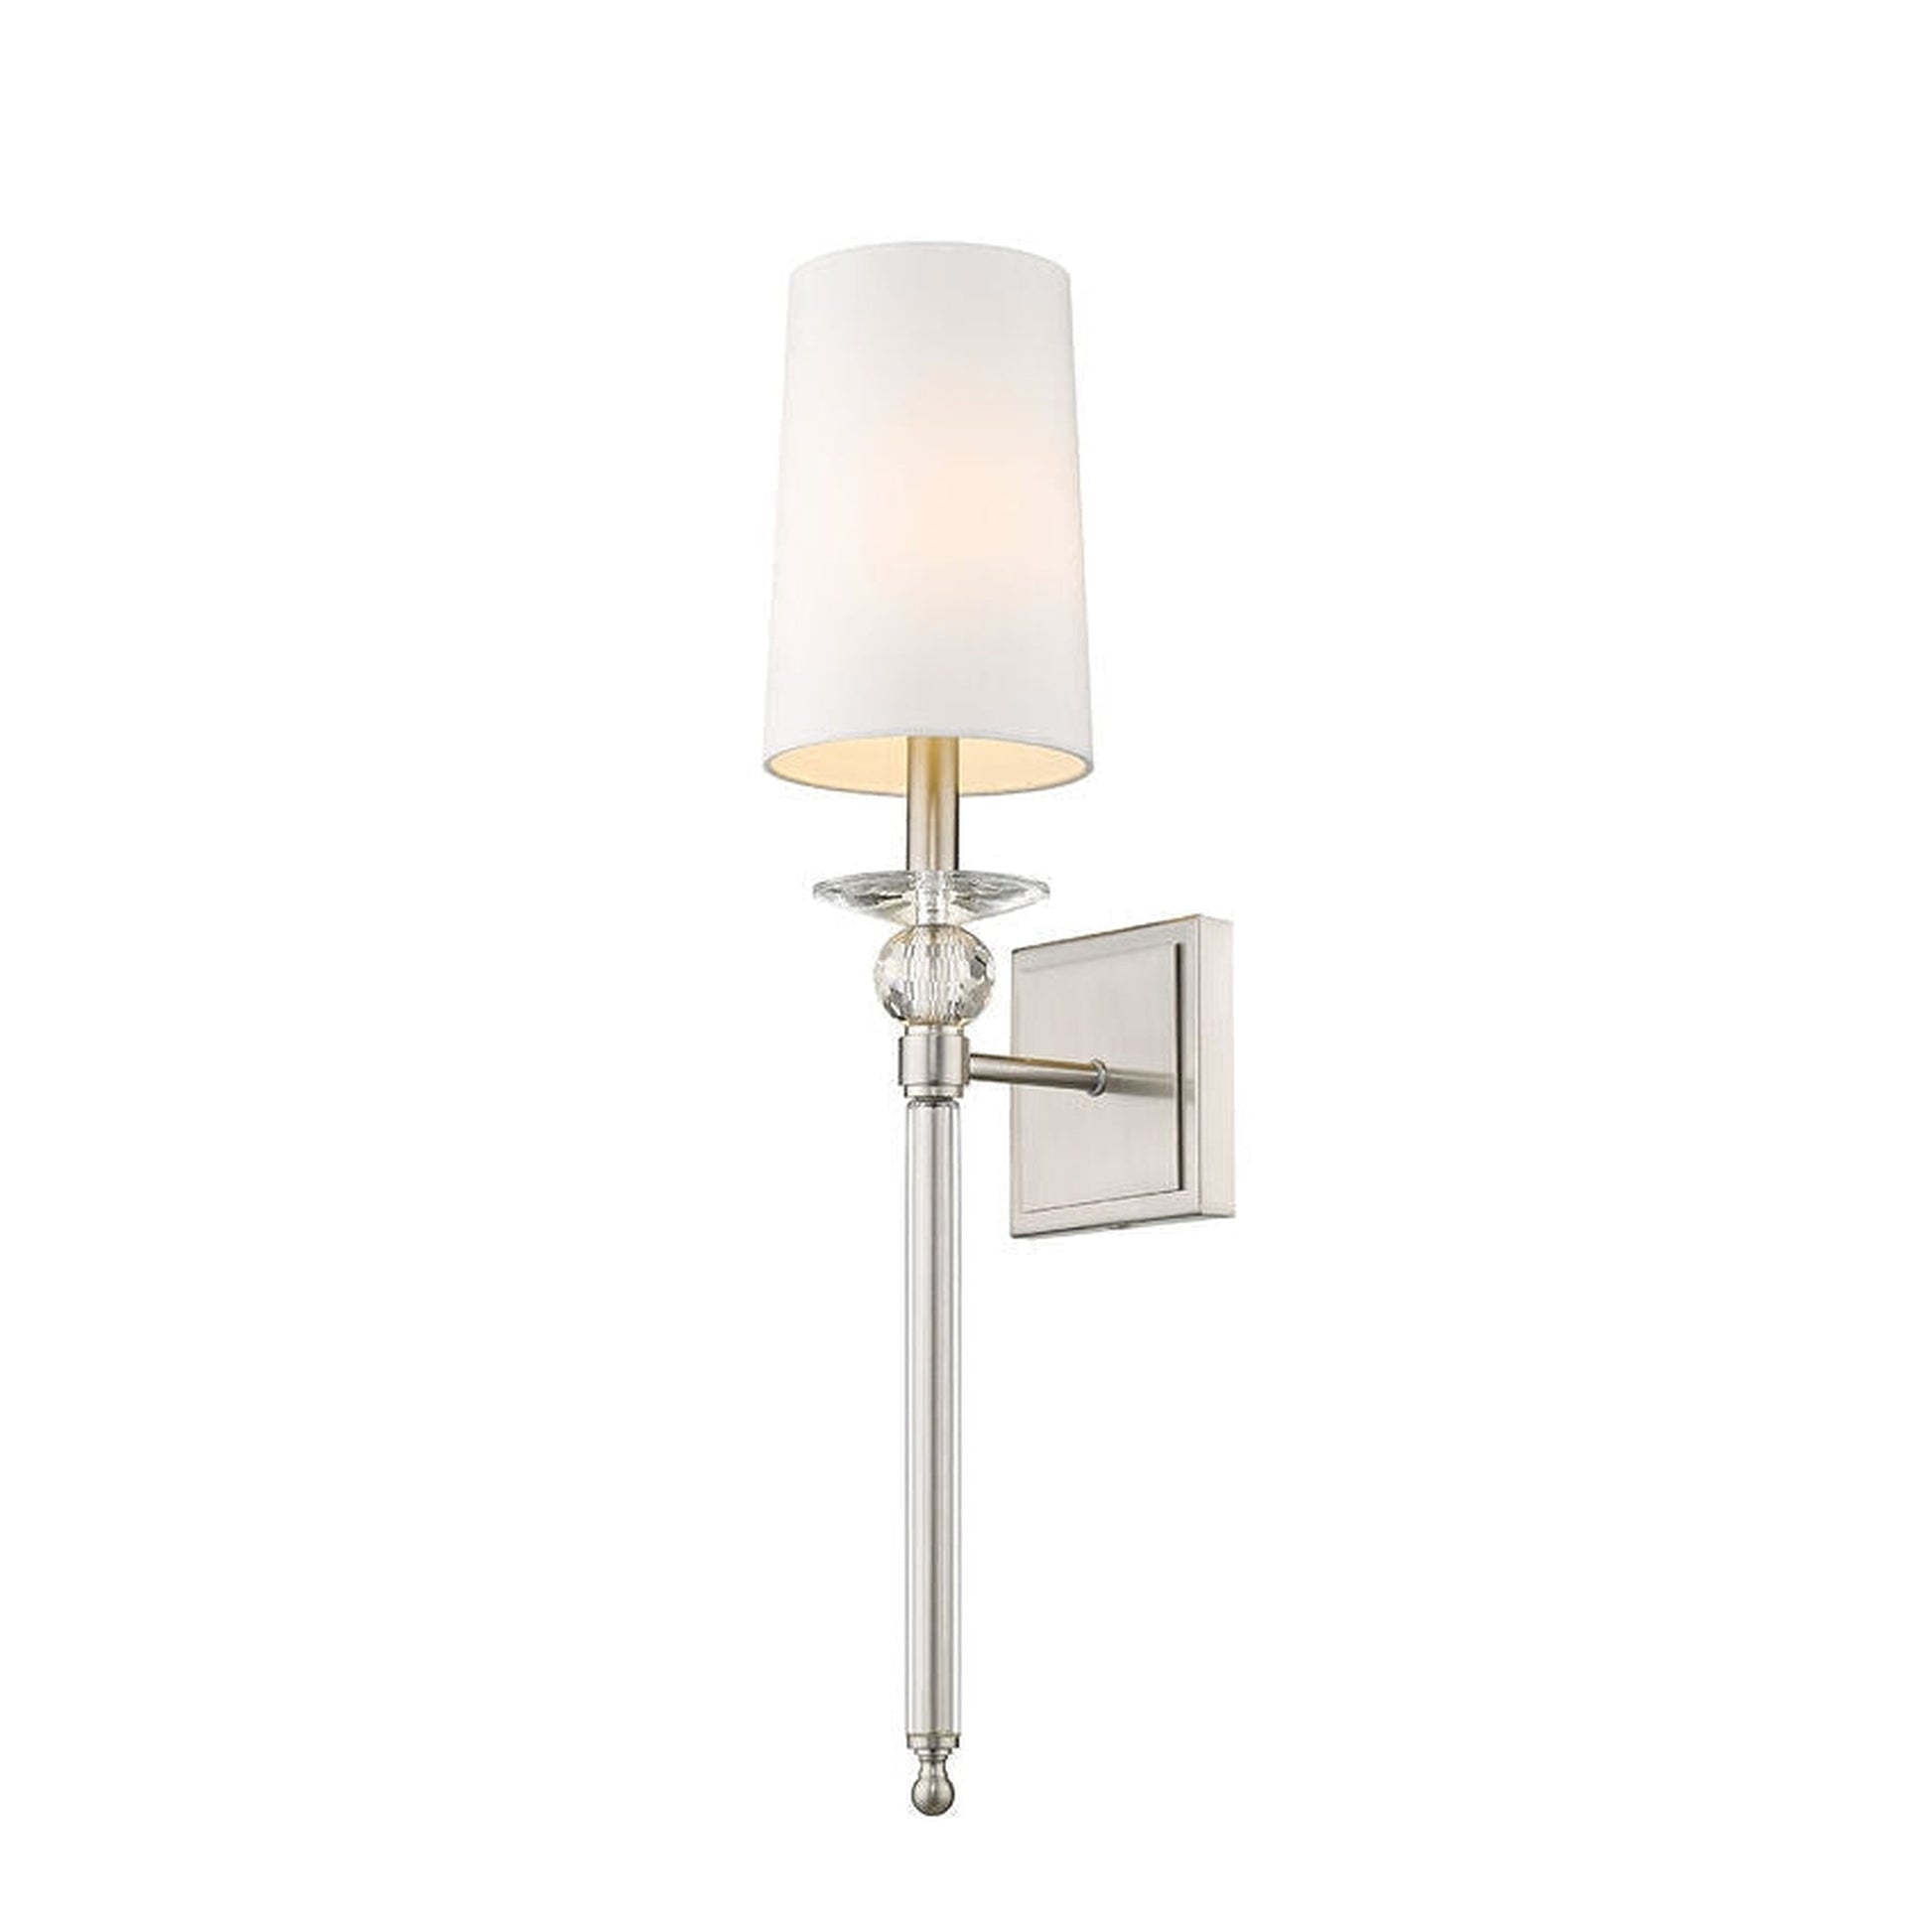 Z-Lite Mia 6" 1-Light Brushed Nickel Wall Sconce With White Fabric Shade